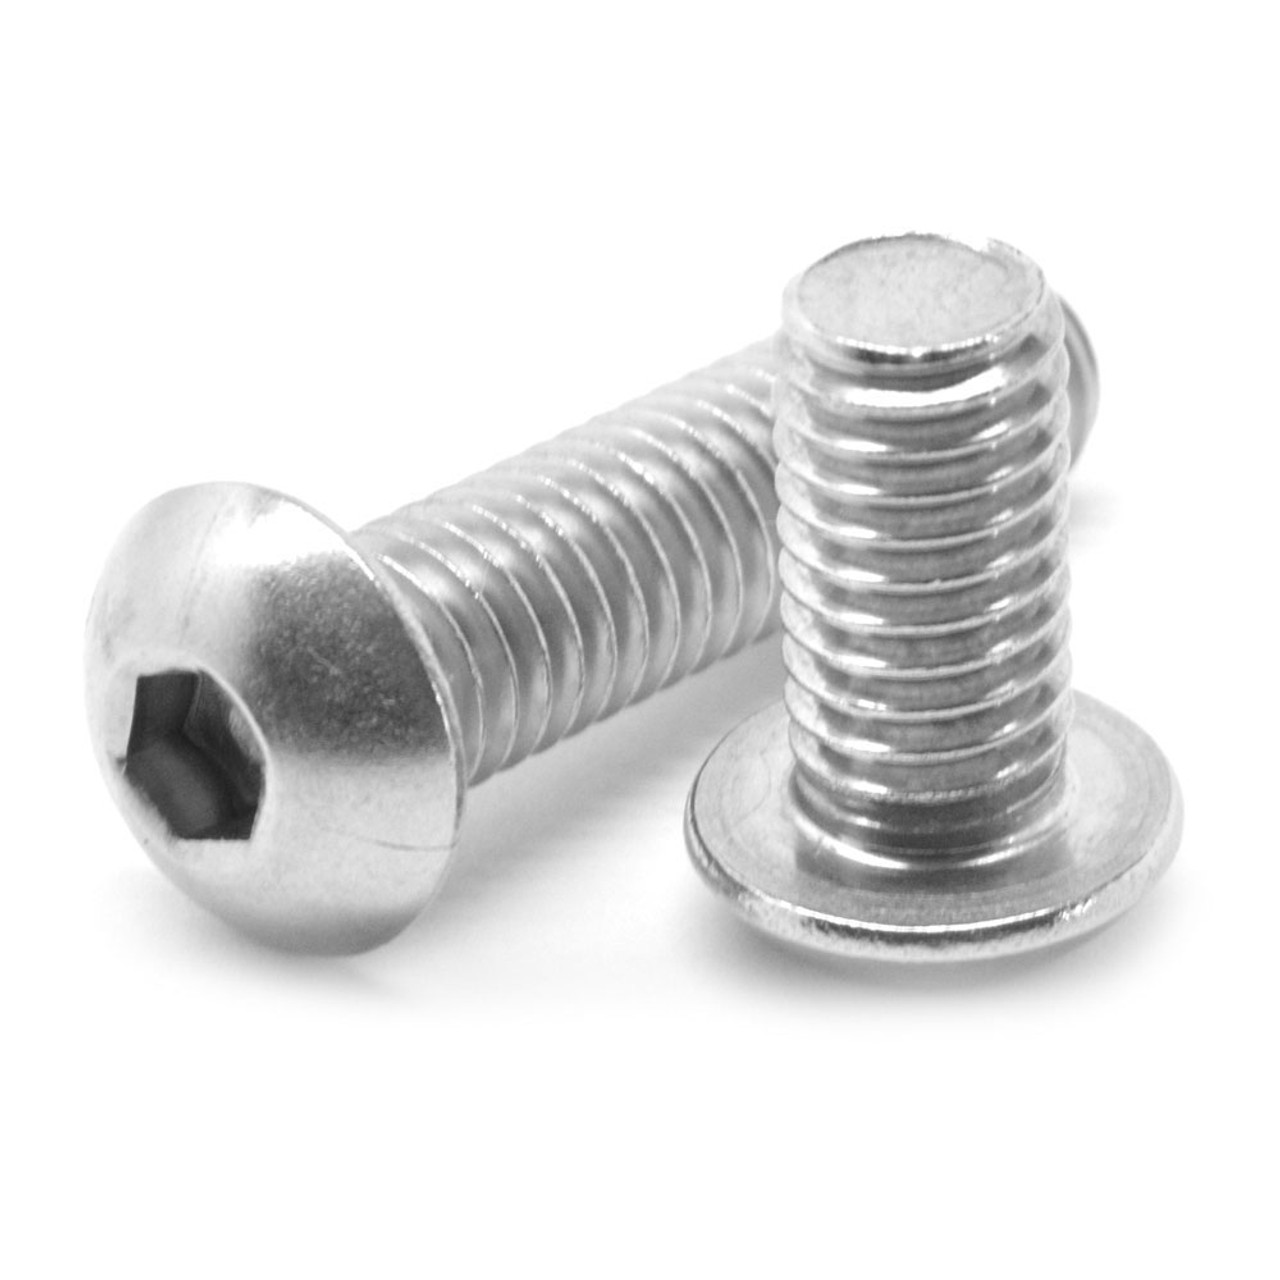 M3 x 0.50 x 16 MM (FT) Coarse Thread ISO 7380 Socket Button Head Cap Screw Stainless Steel 316